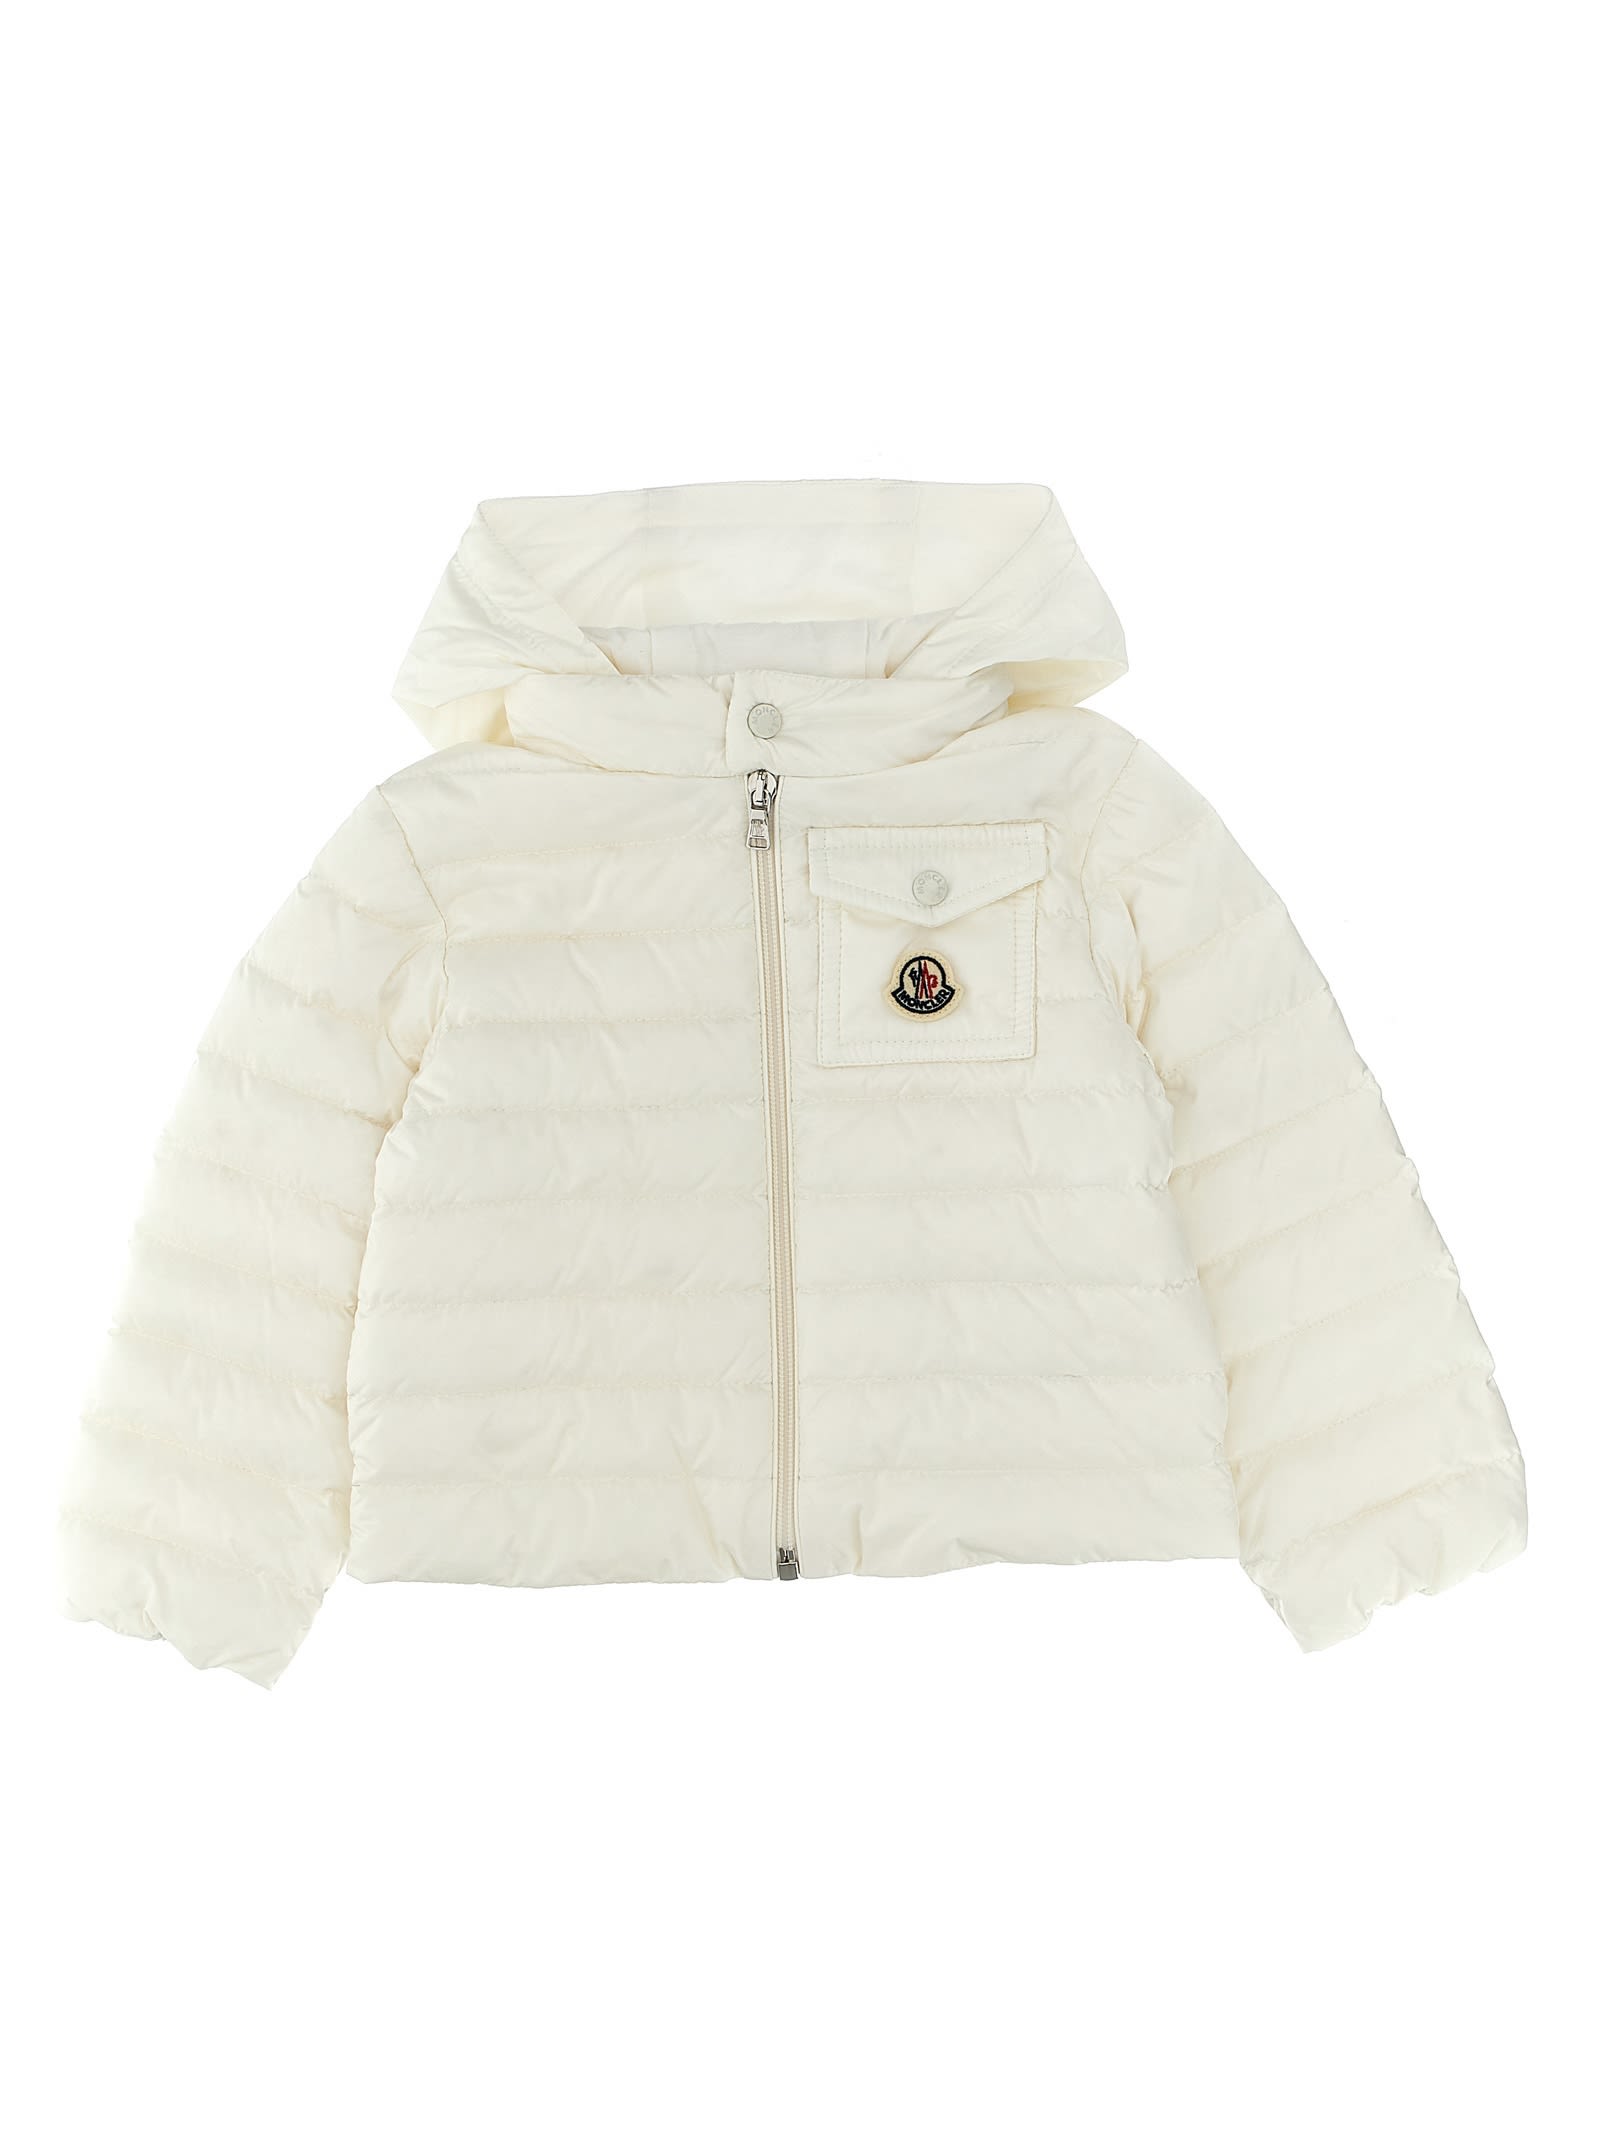 Moncler Babies' Baigal Down Jacket In White